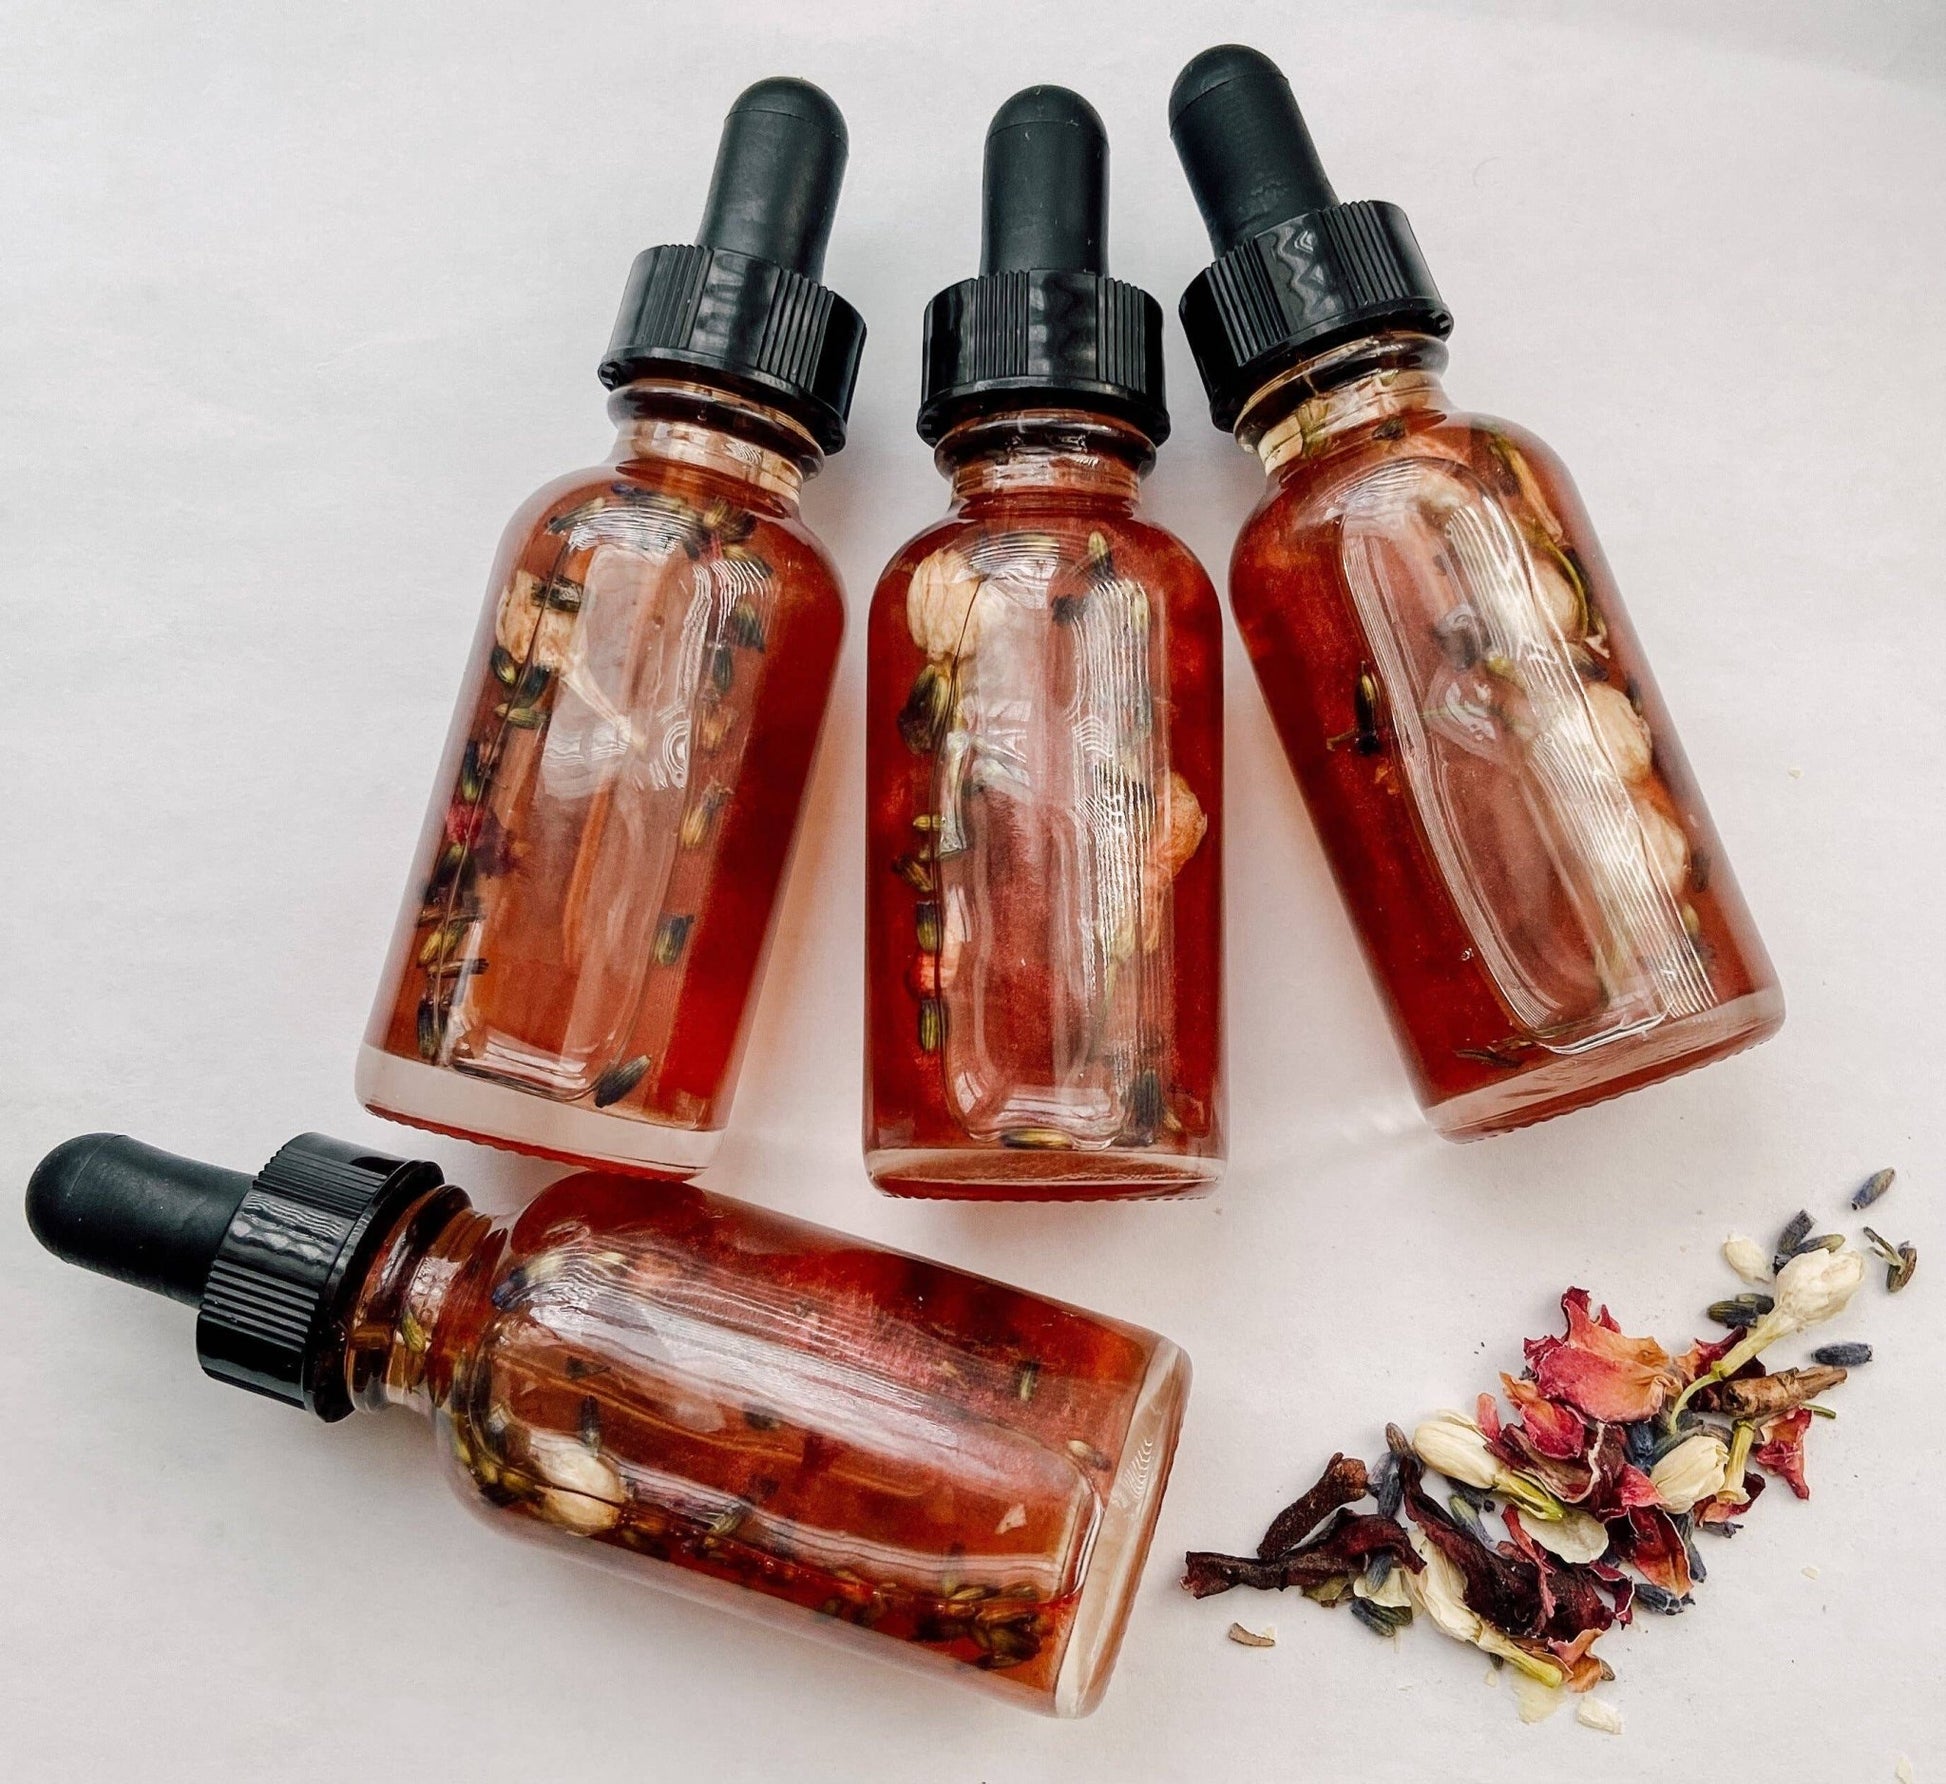 Passion Ritual Oil (Floral Spice) - OH WHAT BEAUTY